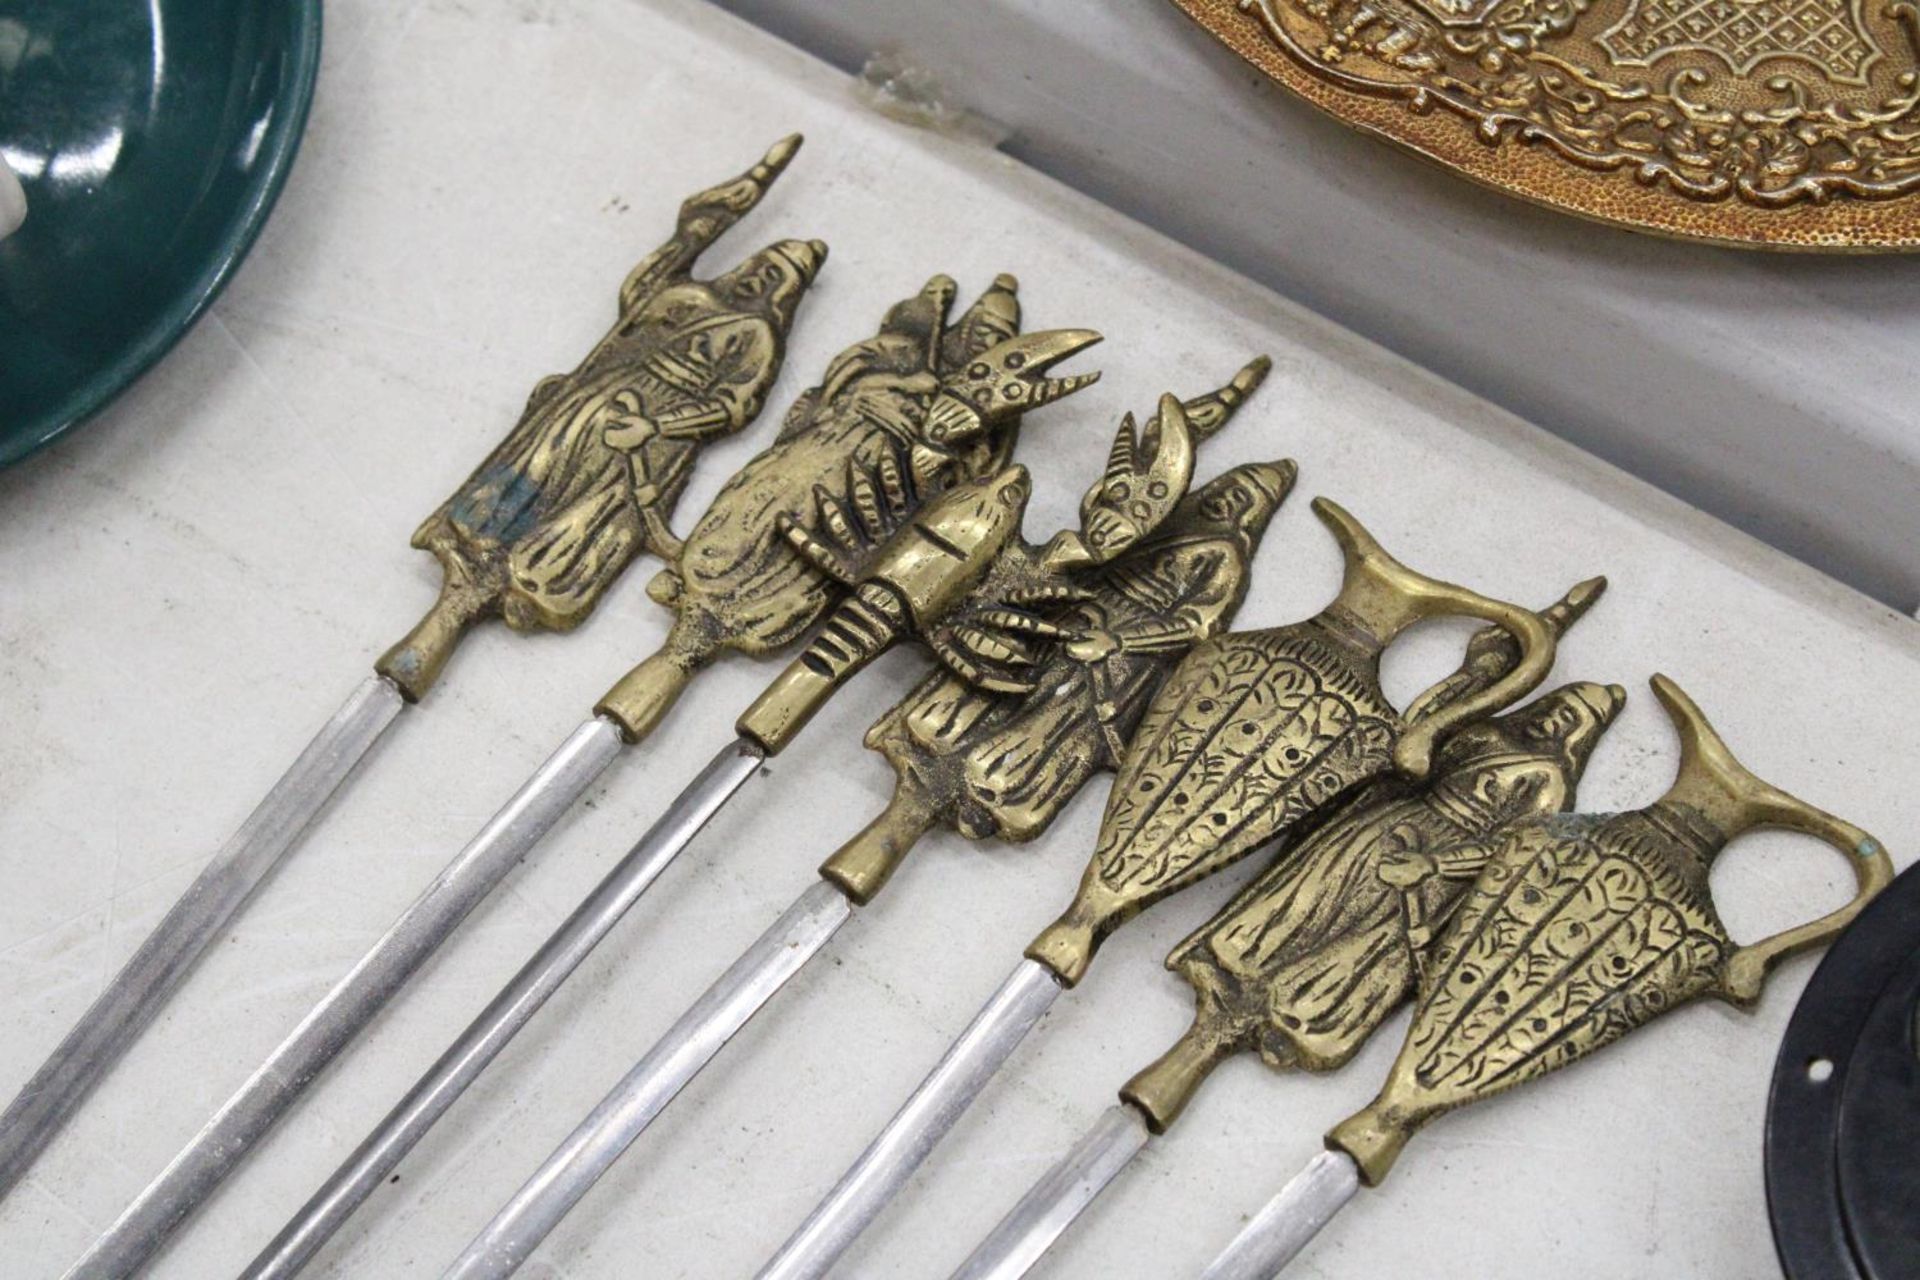 SEVEN VINTAGE BRASS MEAT SKEWERS, LOBSTER, URNS AND WARRIORS - 17 INCH LONG - Image 2 of 4